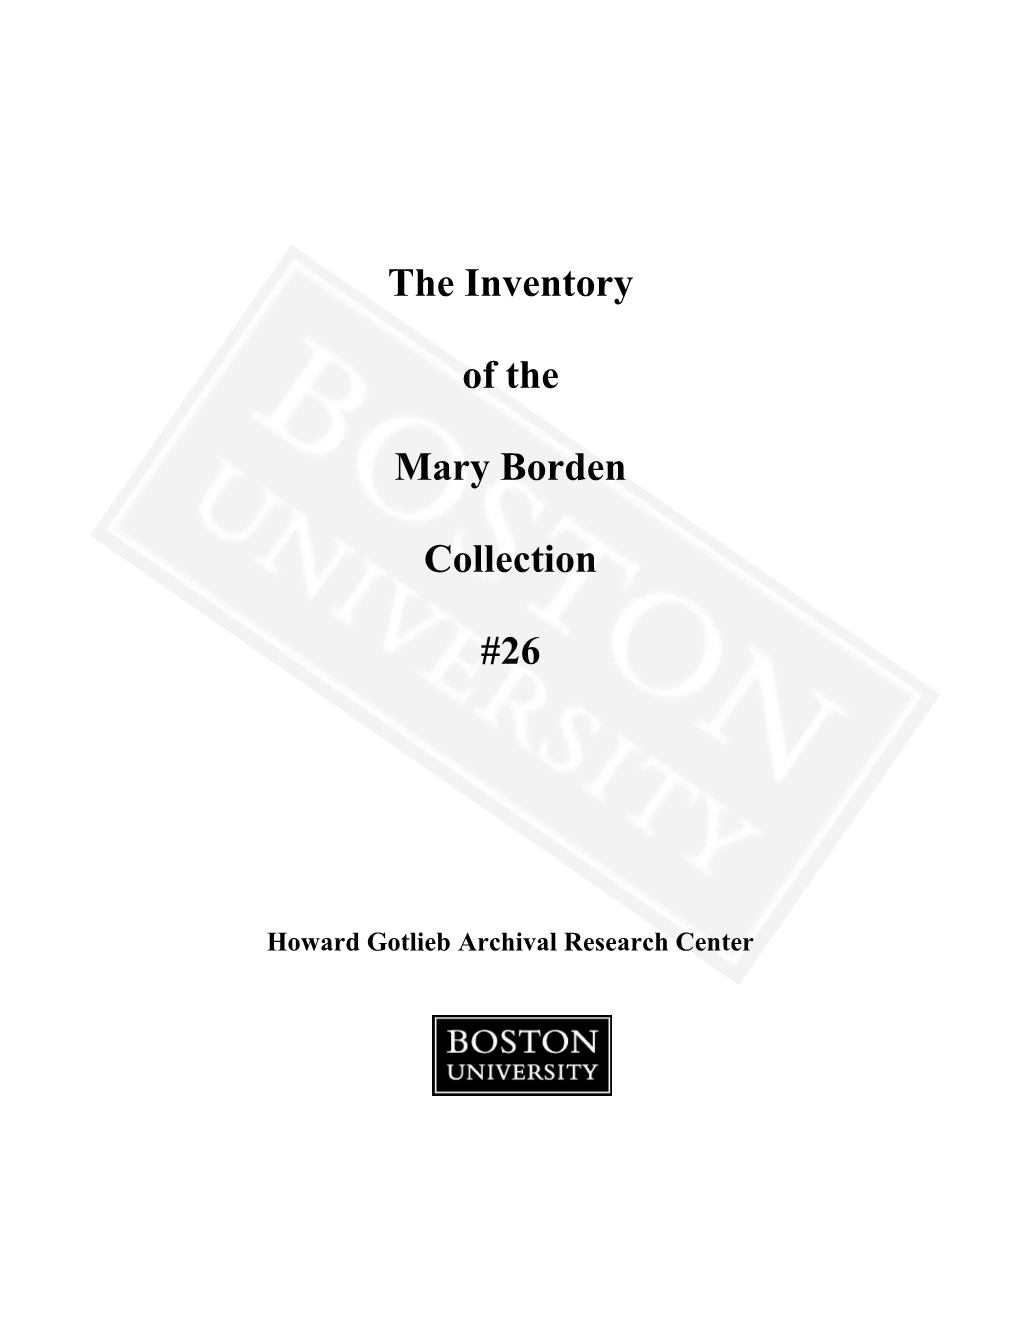 The Inventory of the Mary Borden Collection